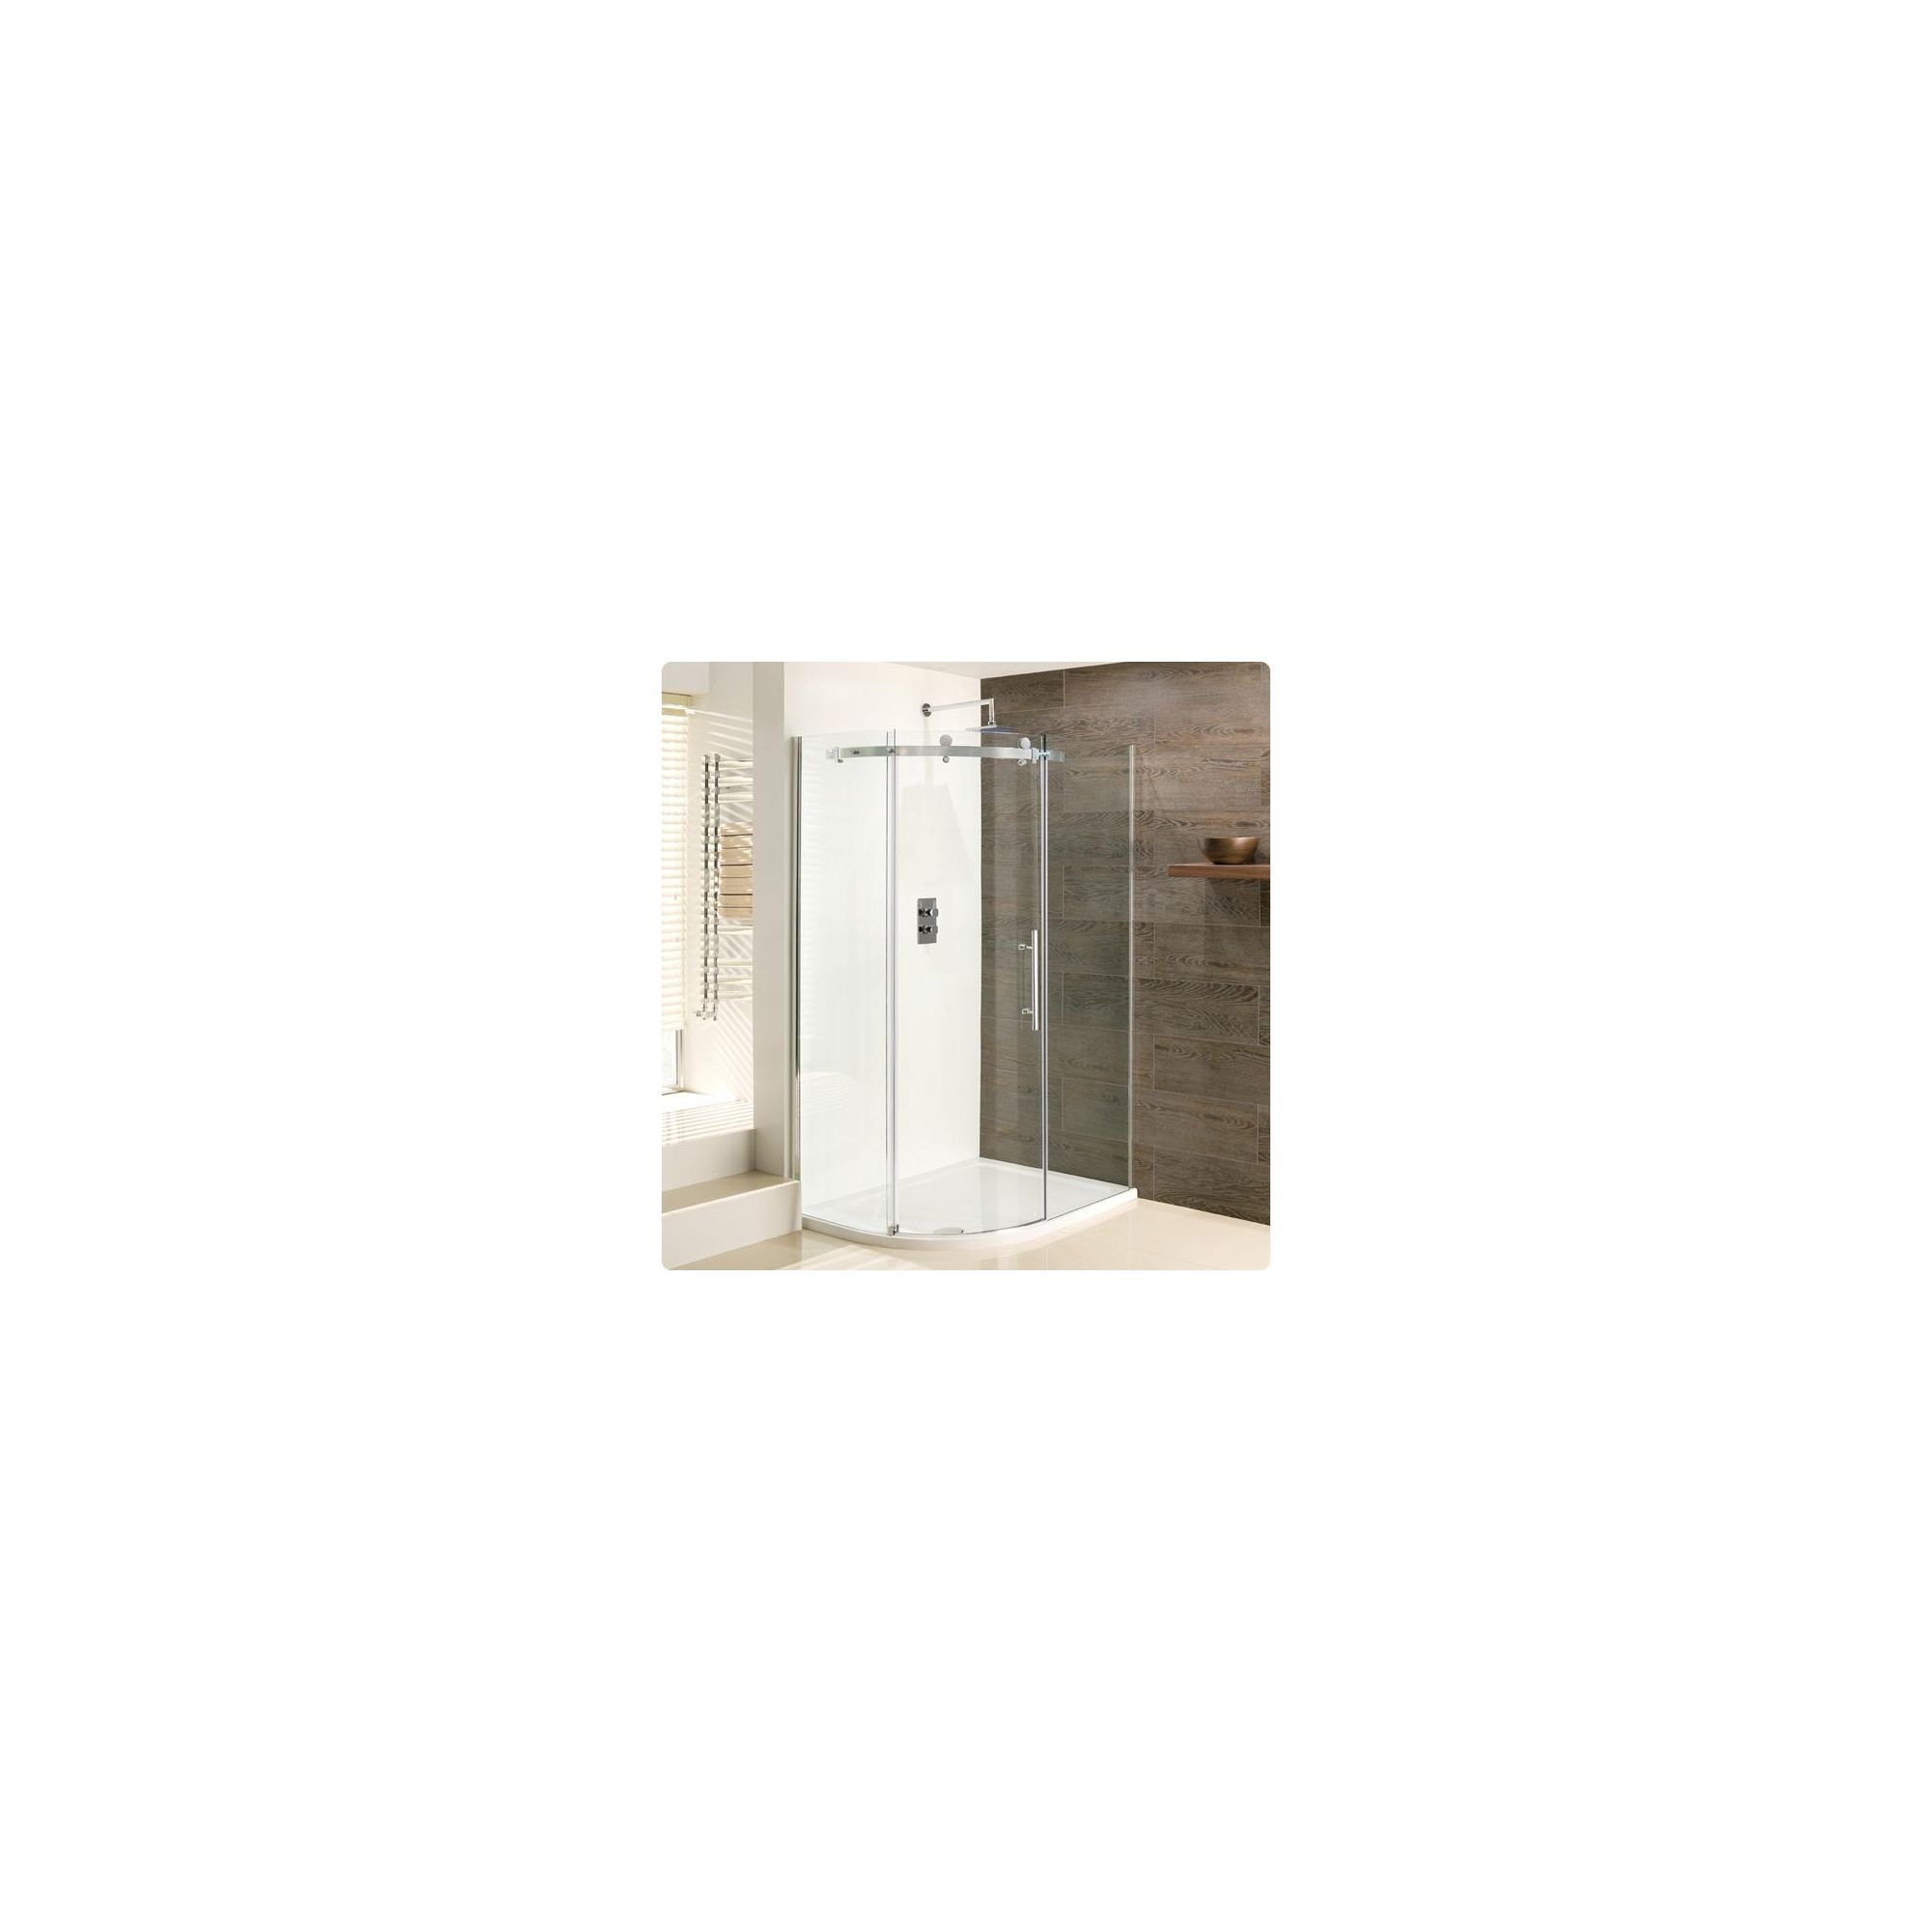 Duchy Deluxe Silver Offset Quadrant Shower Enclosure 1200mm x 900mm (Complete with Tray), 10mm Glass at Tesco Direct